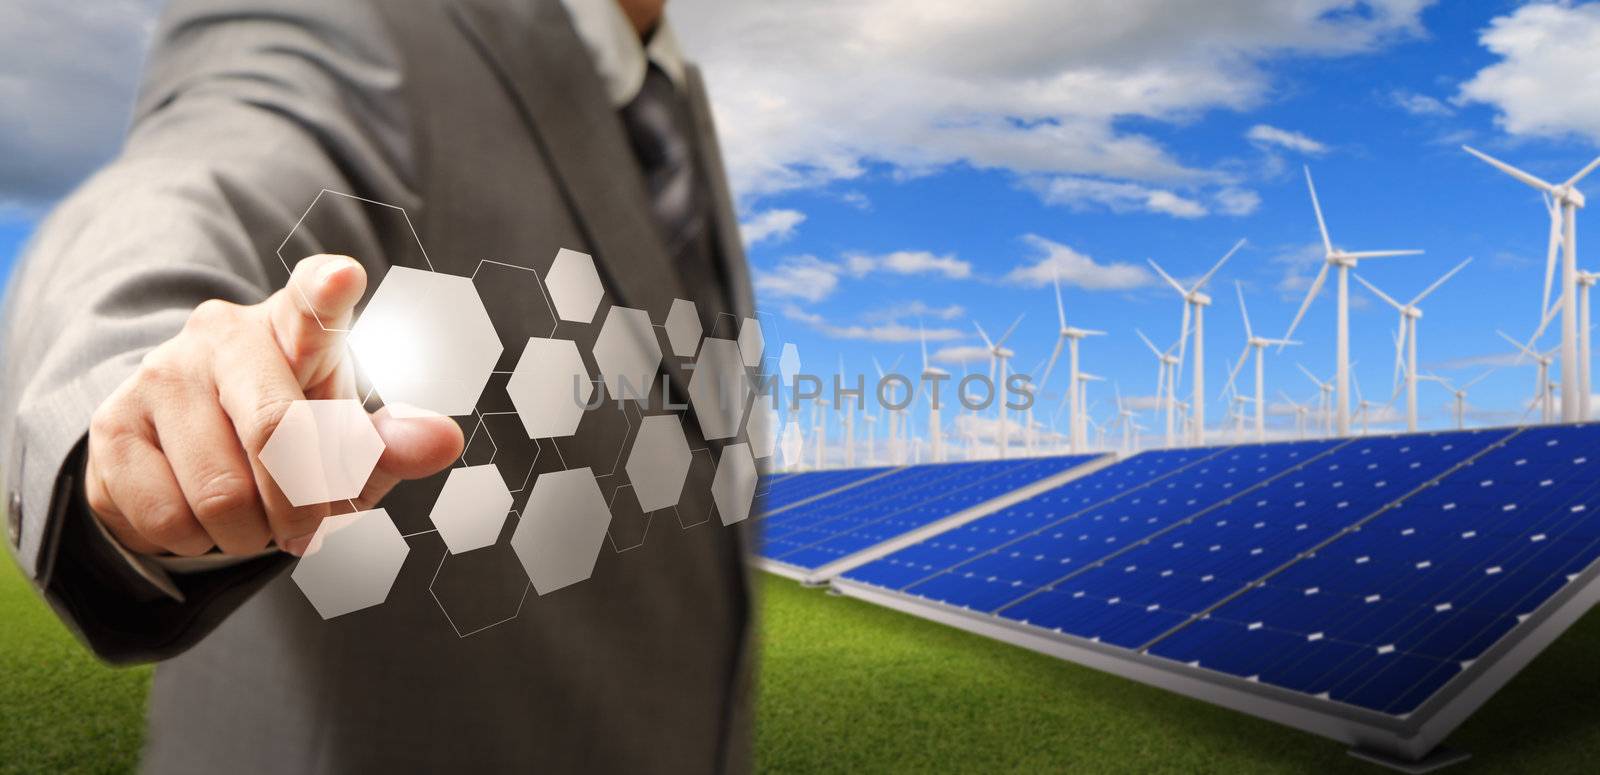 rtual buttons and wind turbine and solar farm by buchachon